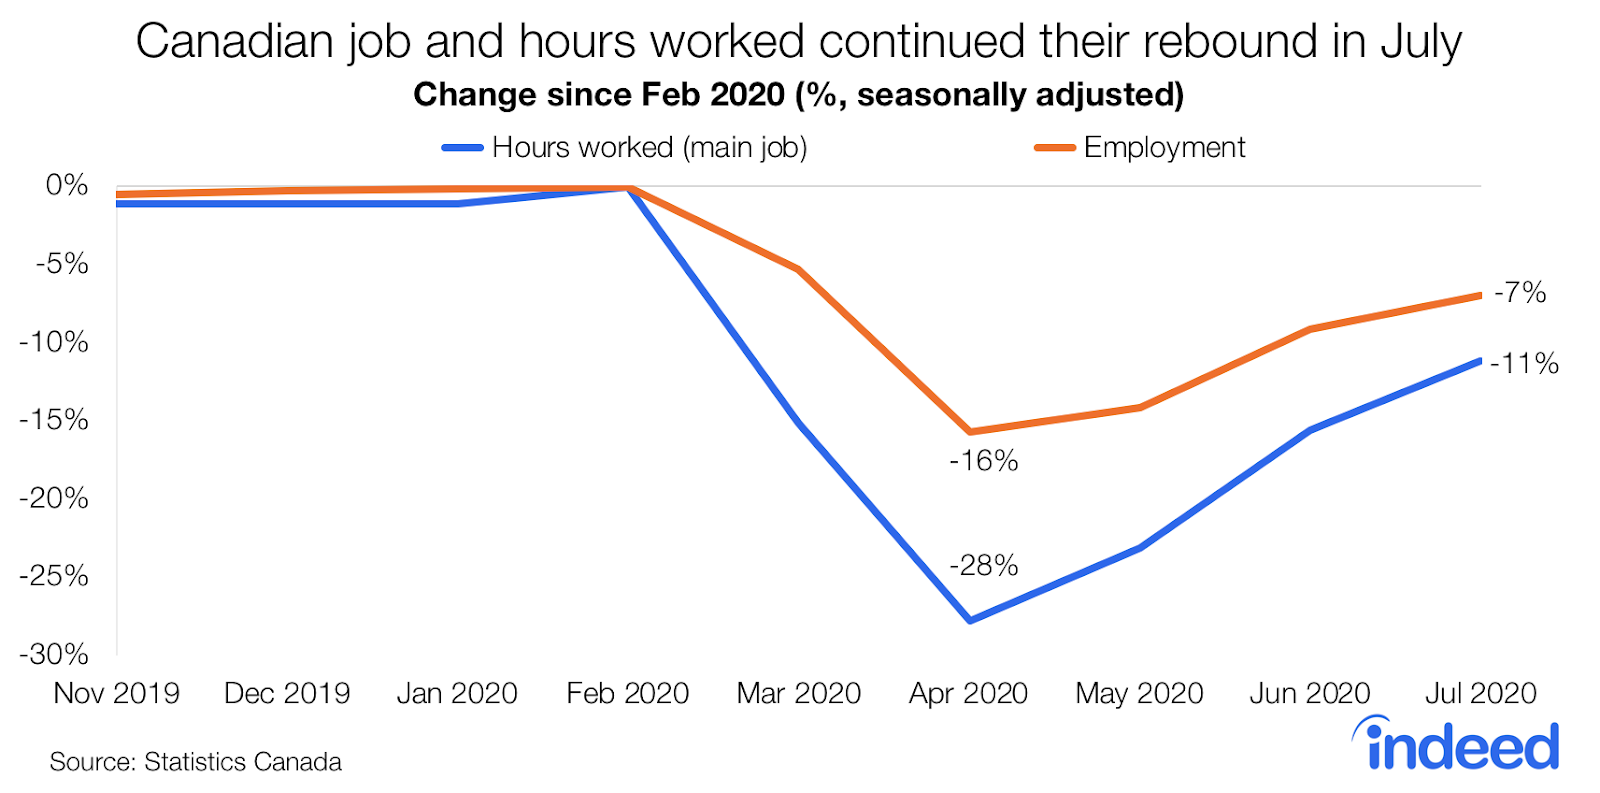 Line graph titled “Canadian job and hours worked continued their rebound in July.” With a vertical axis ranging from -30% to 0%, the graph shows the change since February 2020 (%, seasonally adjusted). It compares hours worked (main job) and employment. Both lines were flat at 0% from November 2019-February 2020. In February both lines drop significantly- with employment at -16% and hours worked at -28% in April 2020. Both lines rebounded since April, with employment rising up to -7% and hours worked up to -11%. Captions added post-publication.